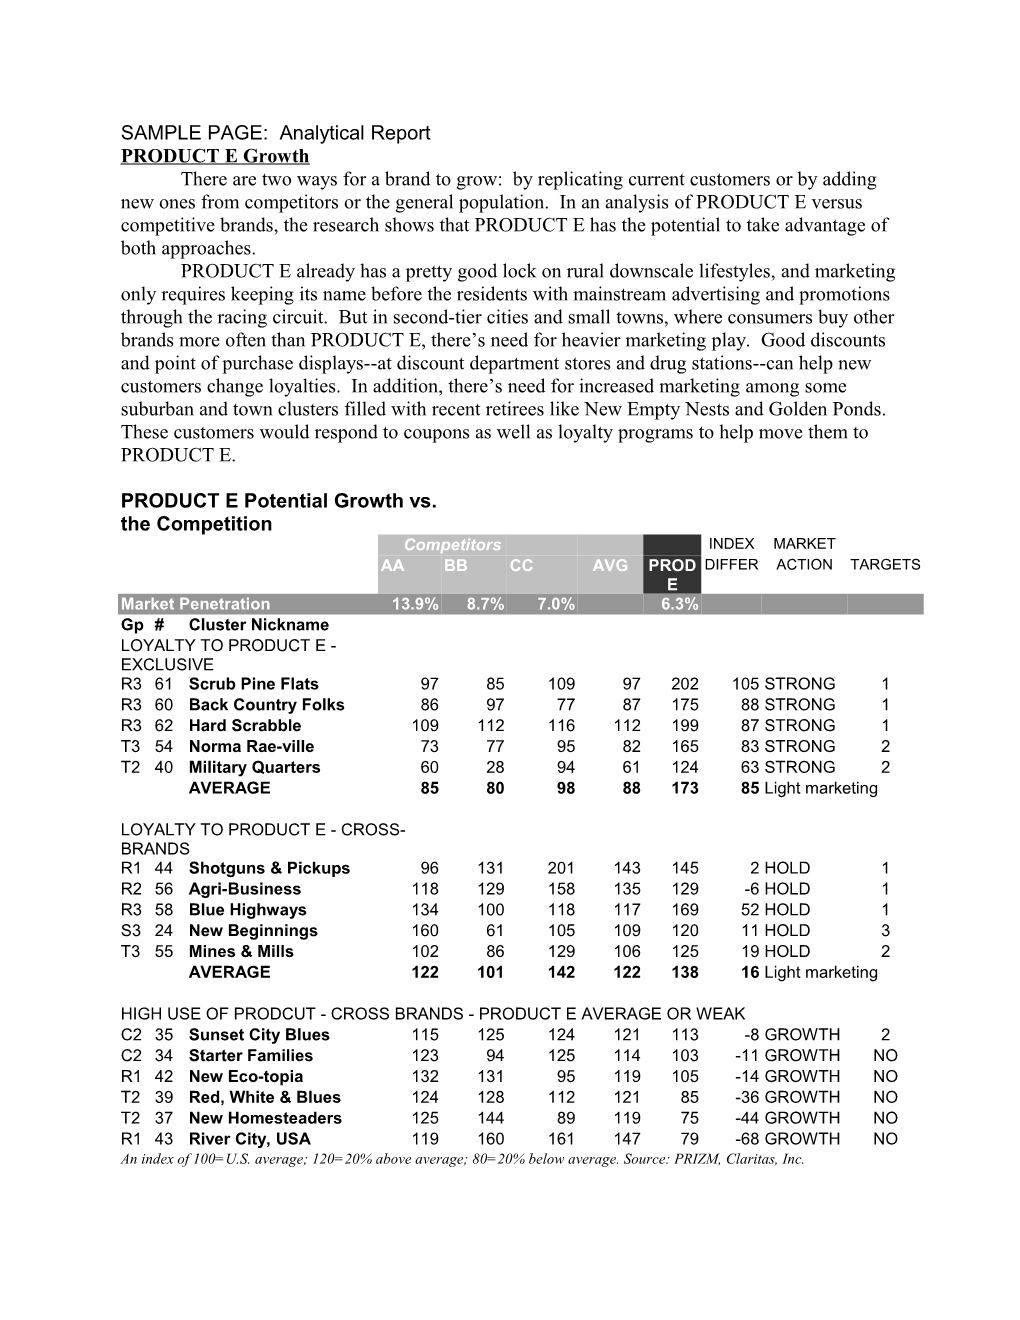 SAMPLE PAGE: Analytical Reports